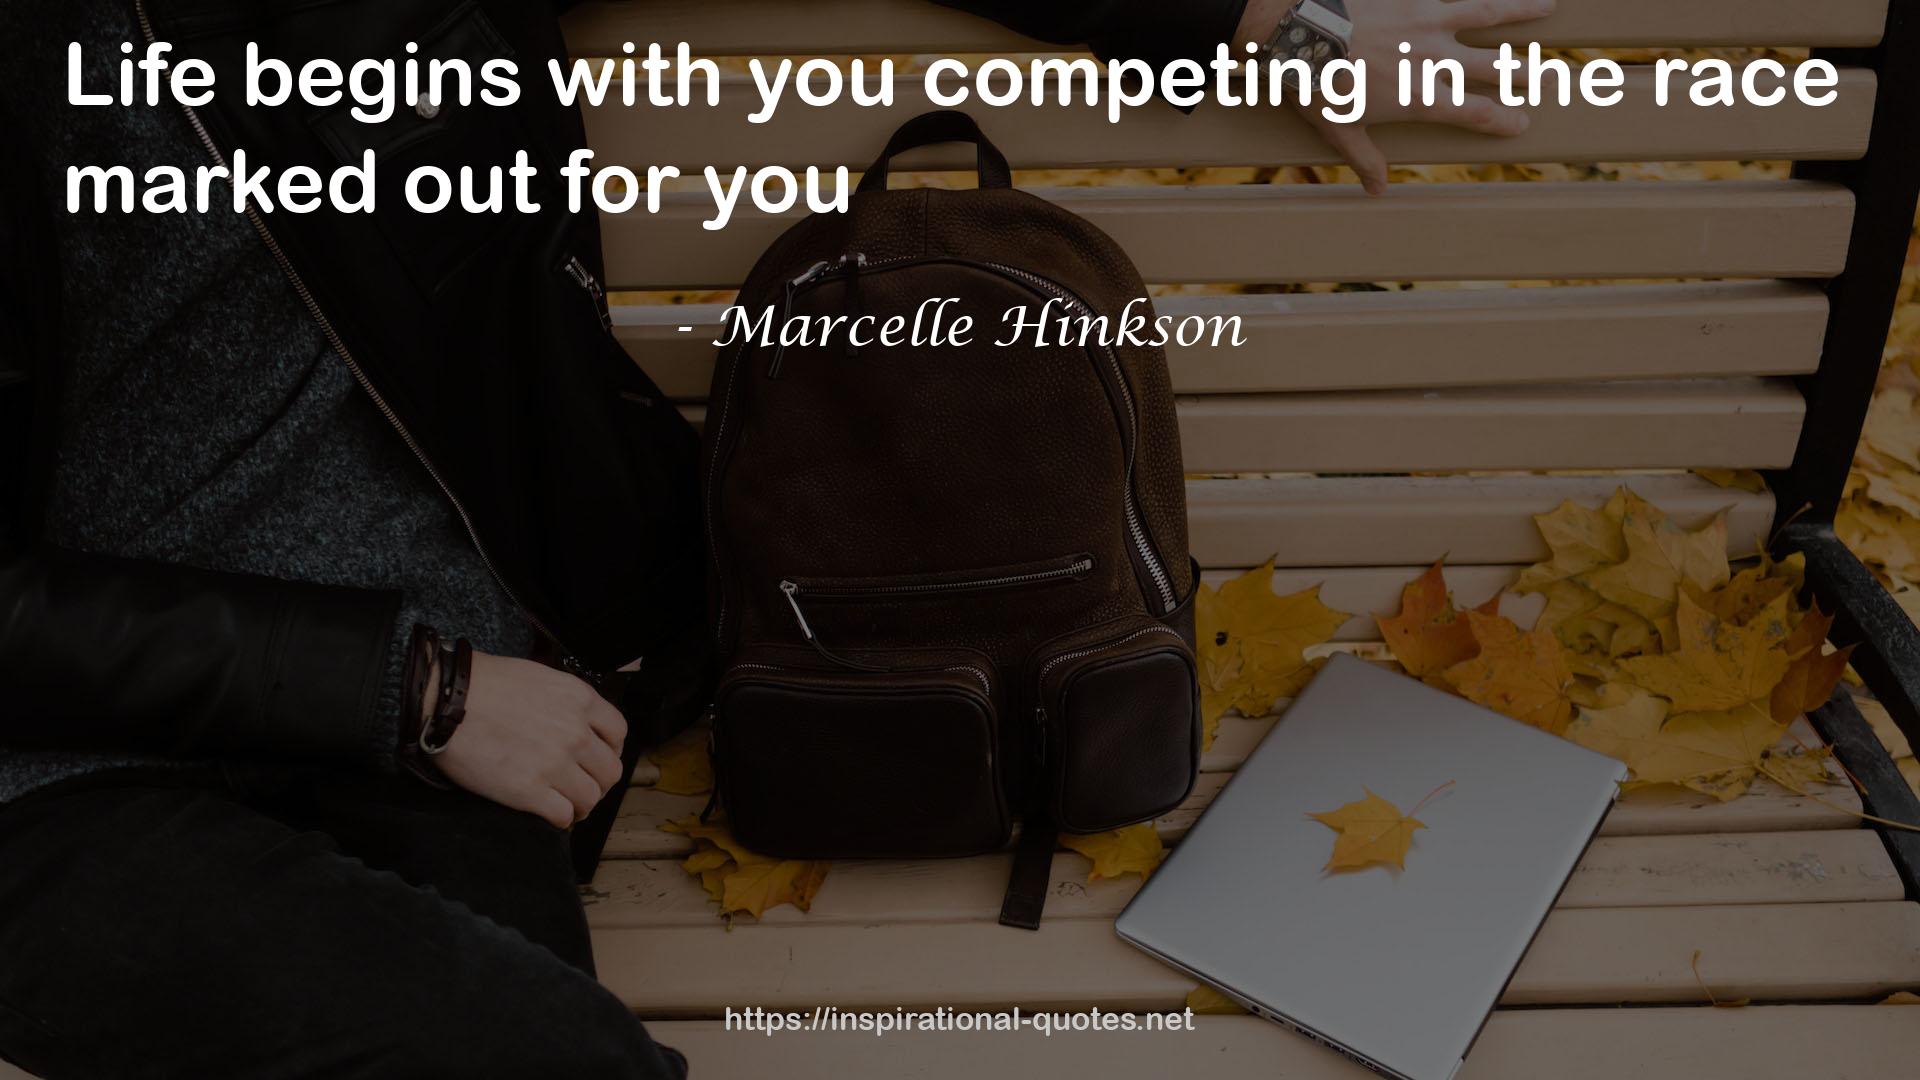 Marcelle Hinkson QUOTES